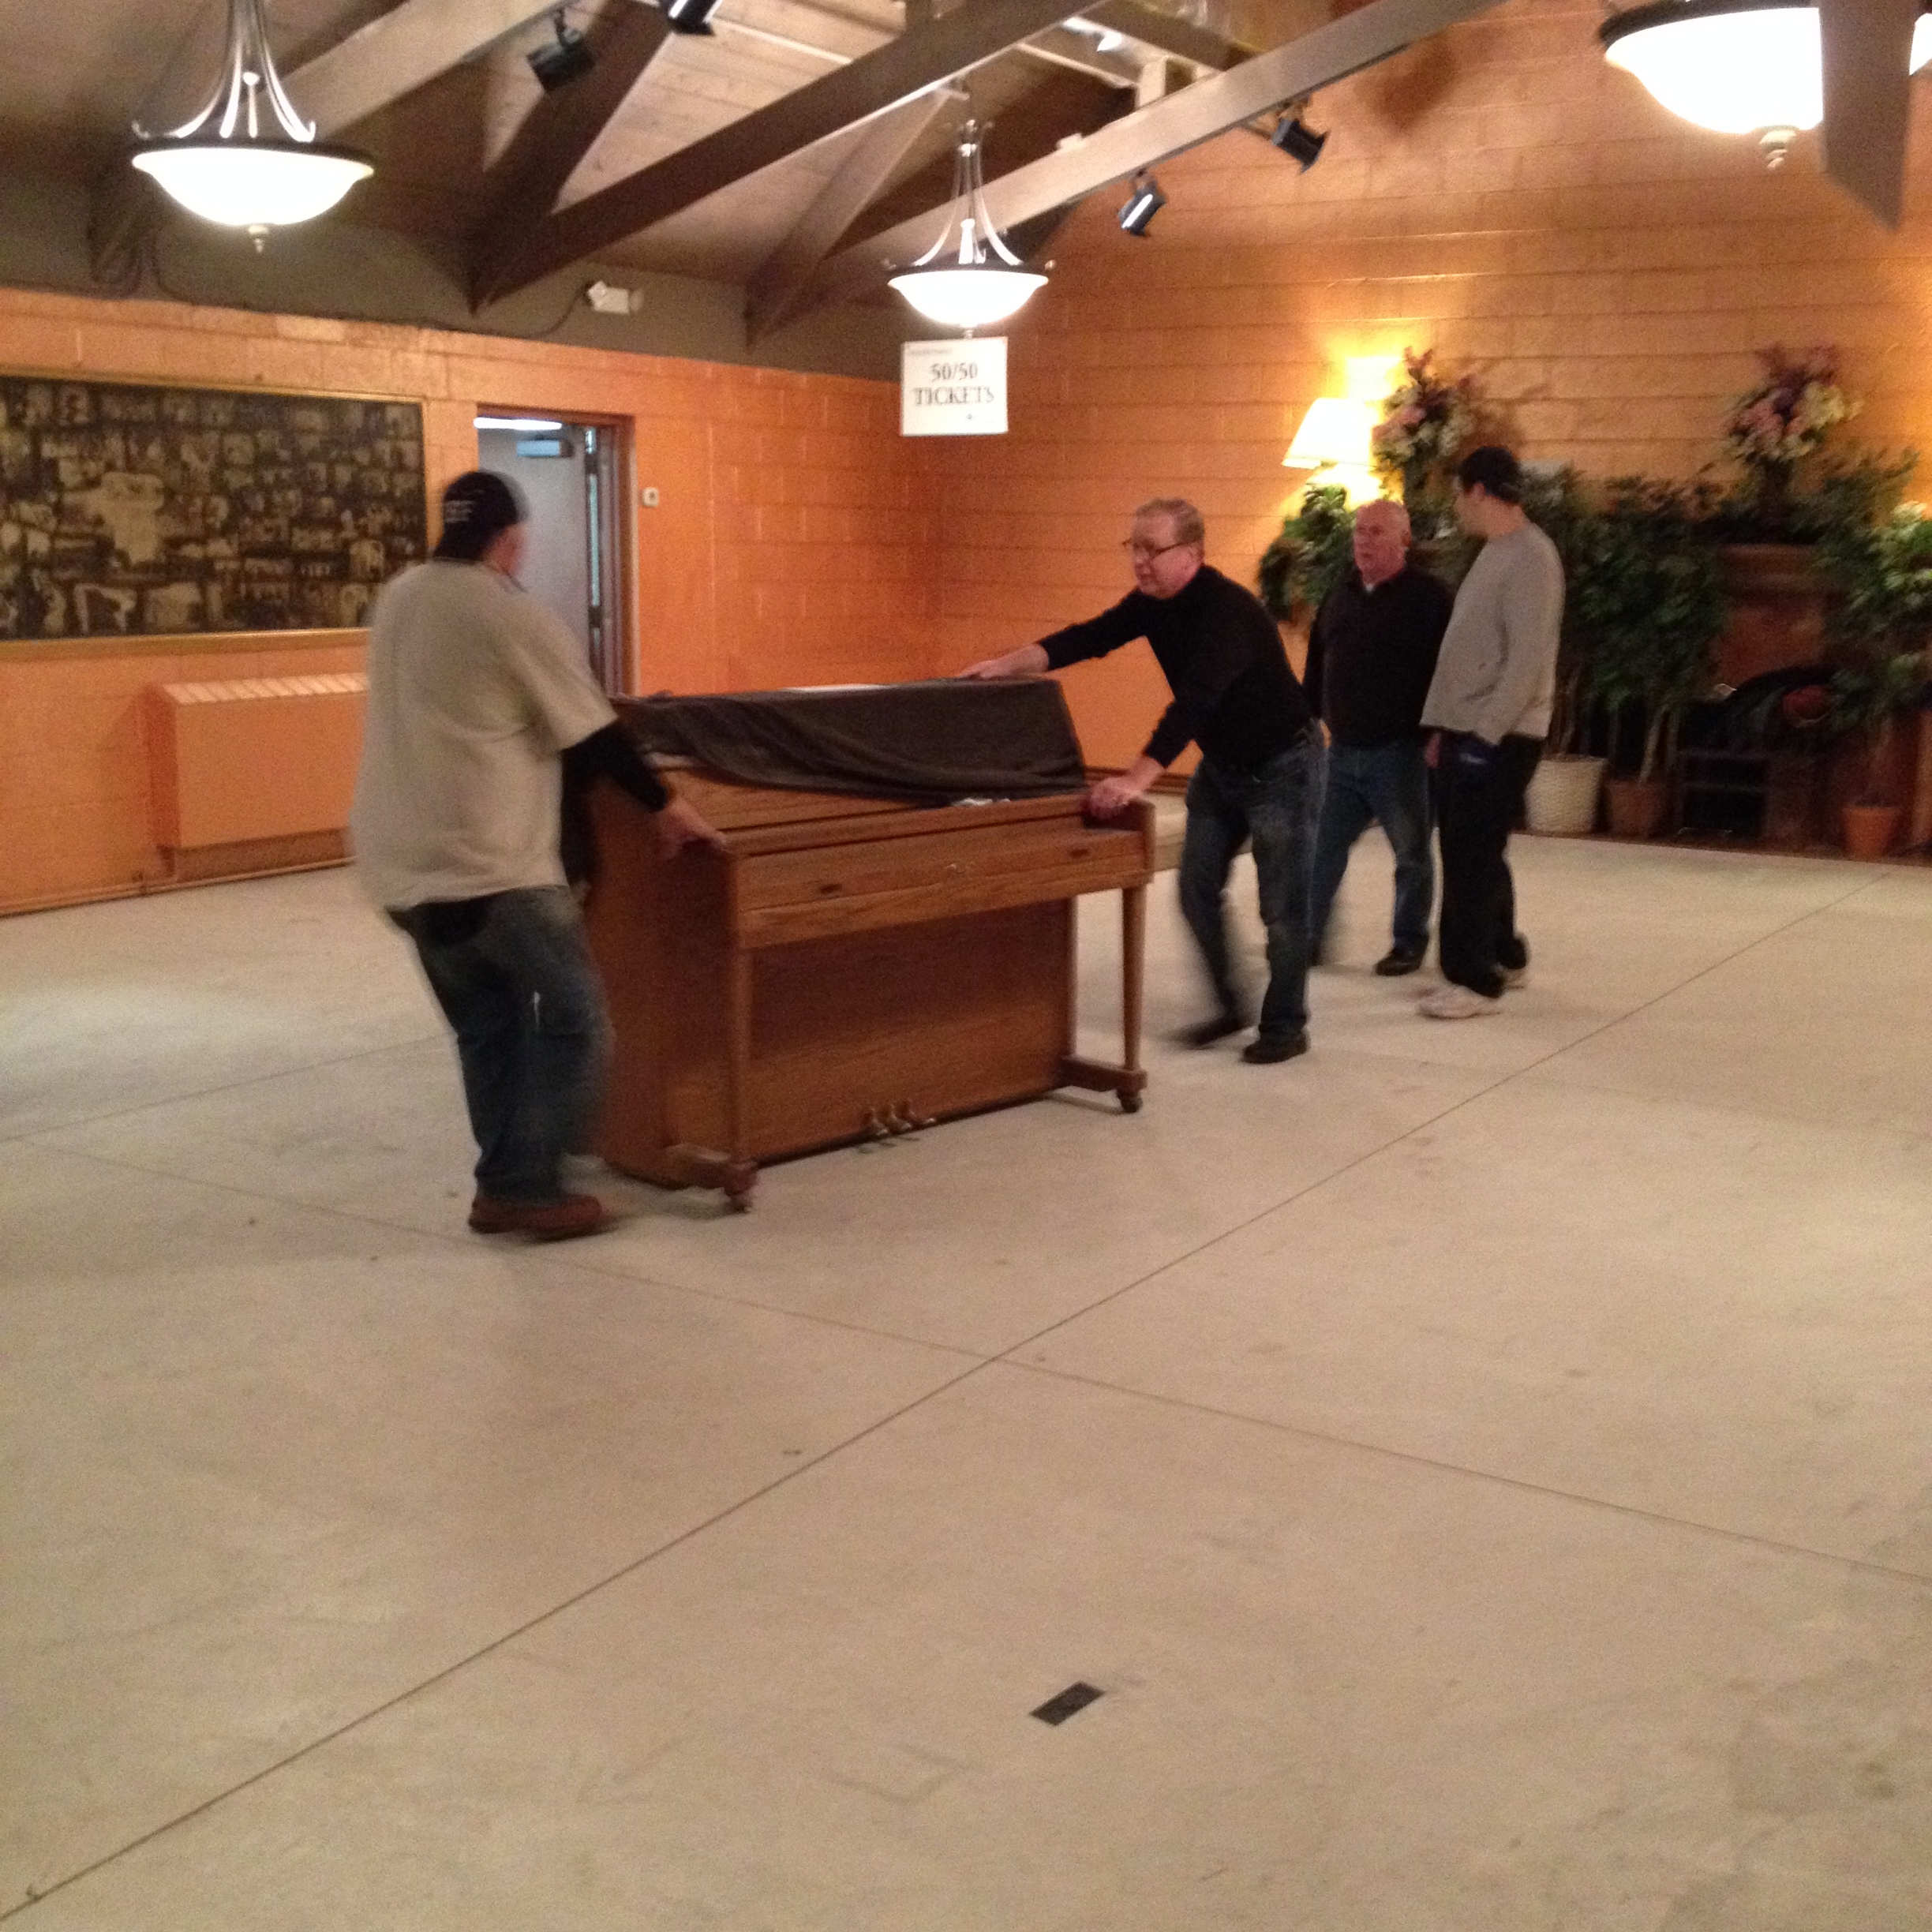 Pat Denyer and Richard Moore move the piano while Chris Boudreau and Steve Gautreau watch.